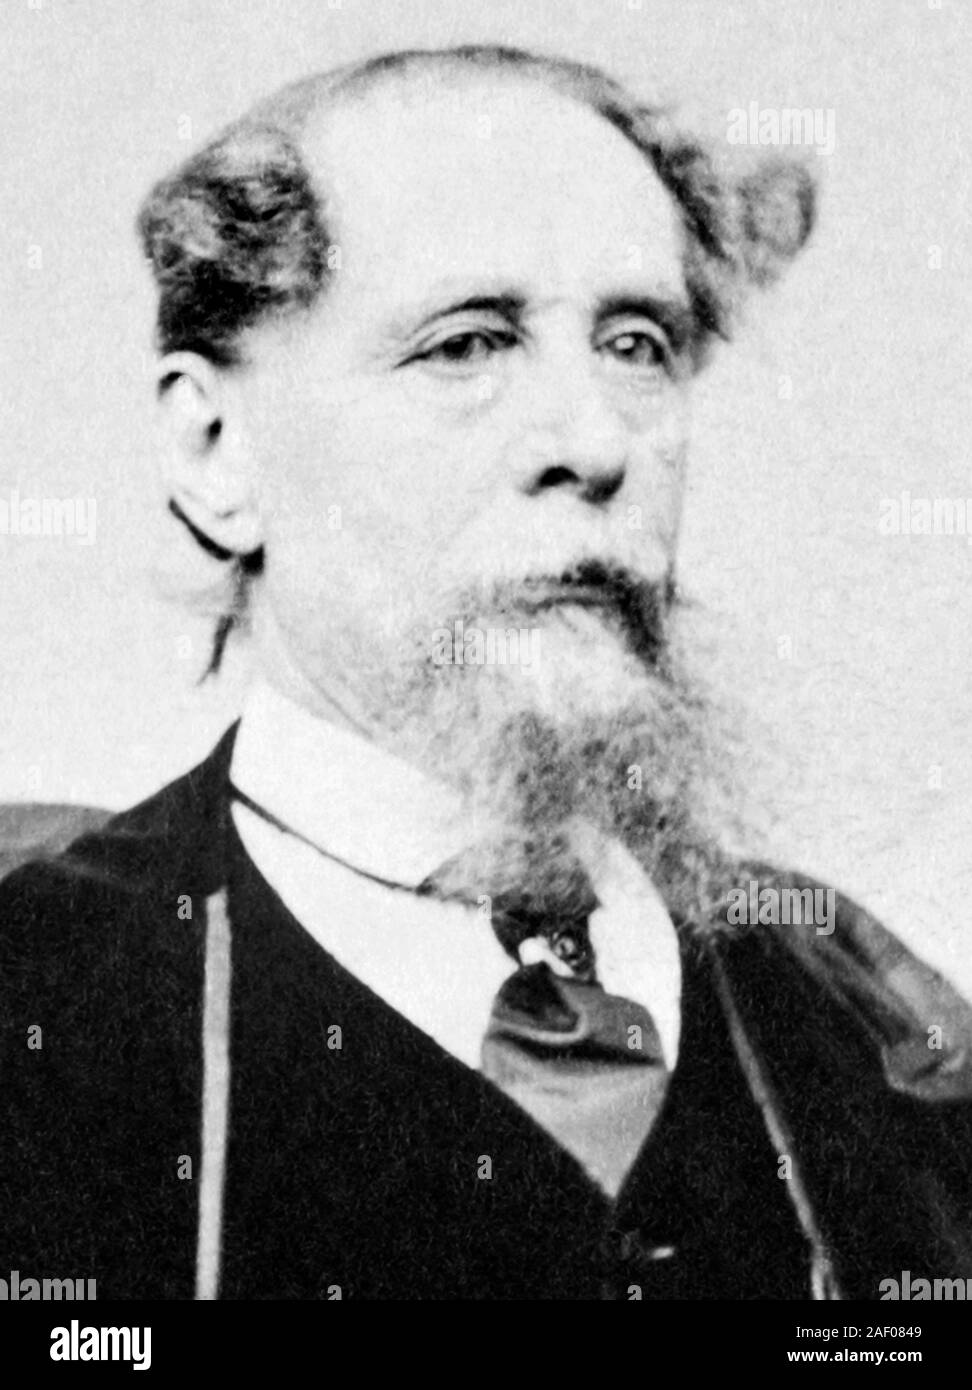 Vintage portrait photo of English author Charles Dickens (1812 – 1870). Photo circa 1867 by J Gurney & Son of New York. Stock Photo